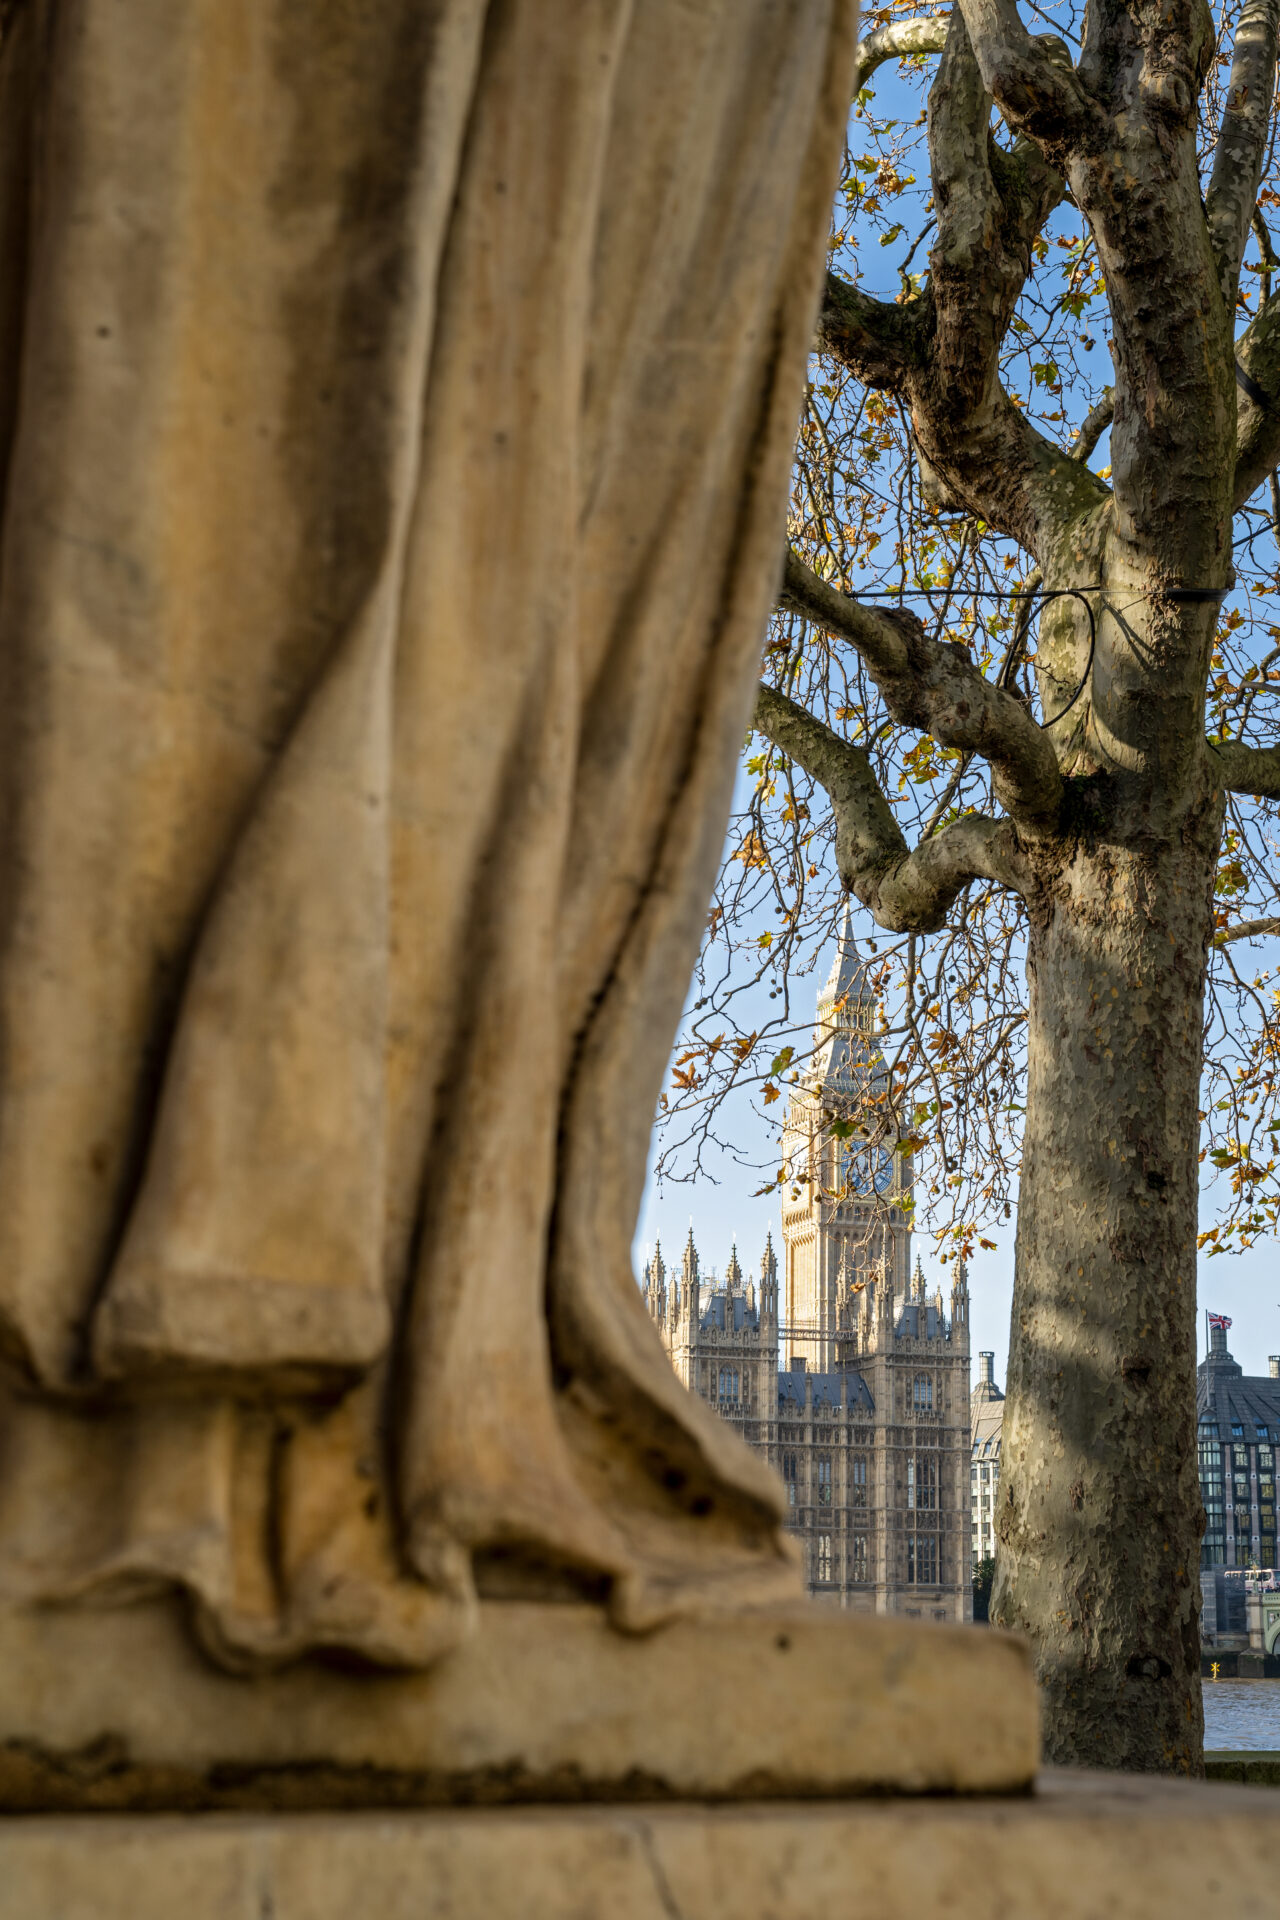 Base of Sir Robert Clayton statue, with Houses of Parliament in the background